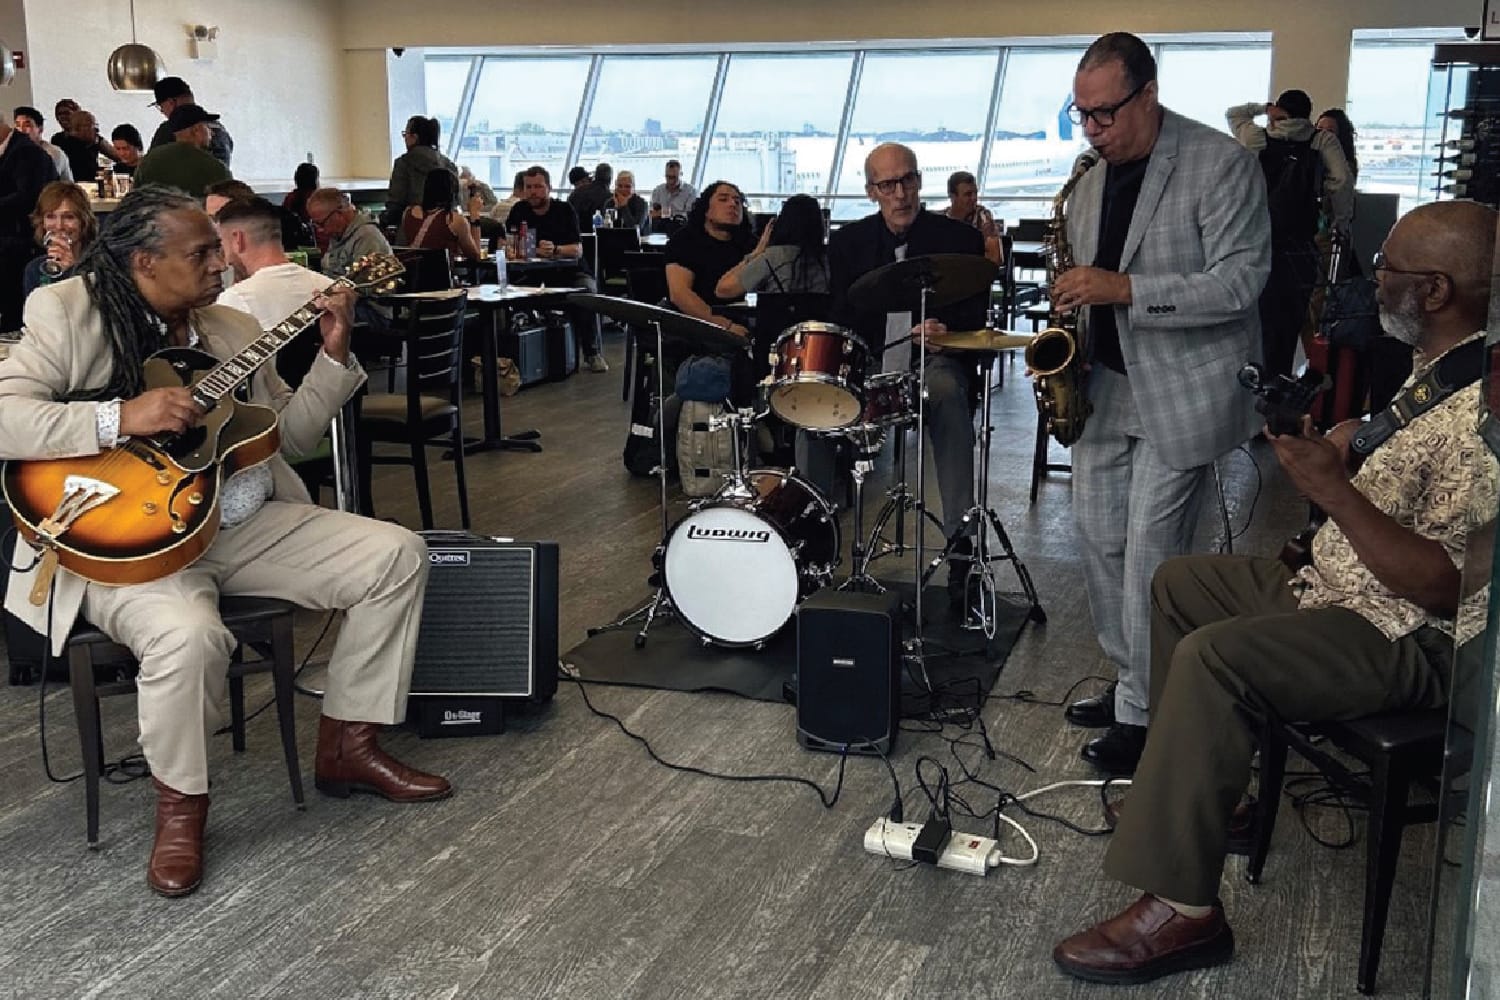 South-East Queens’ rich cultural heritage and jazz history come to life inside Terminal 6.